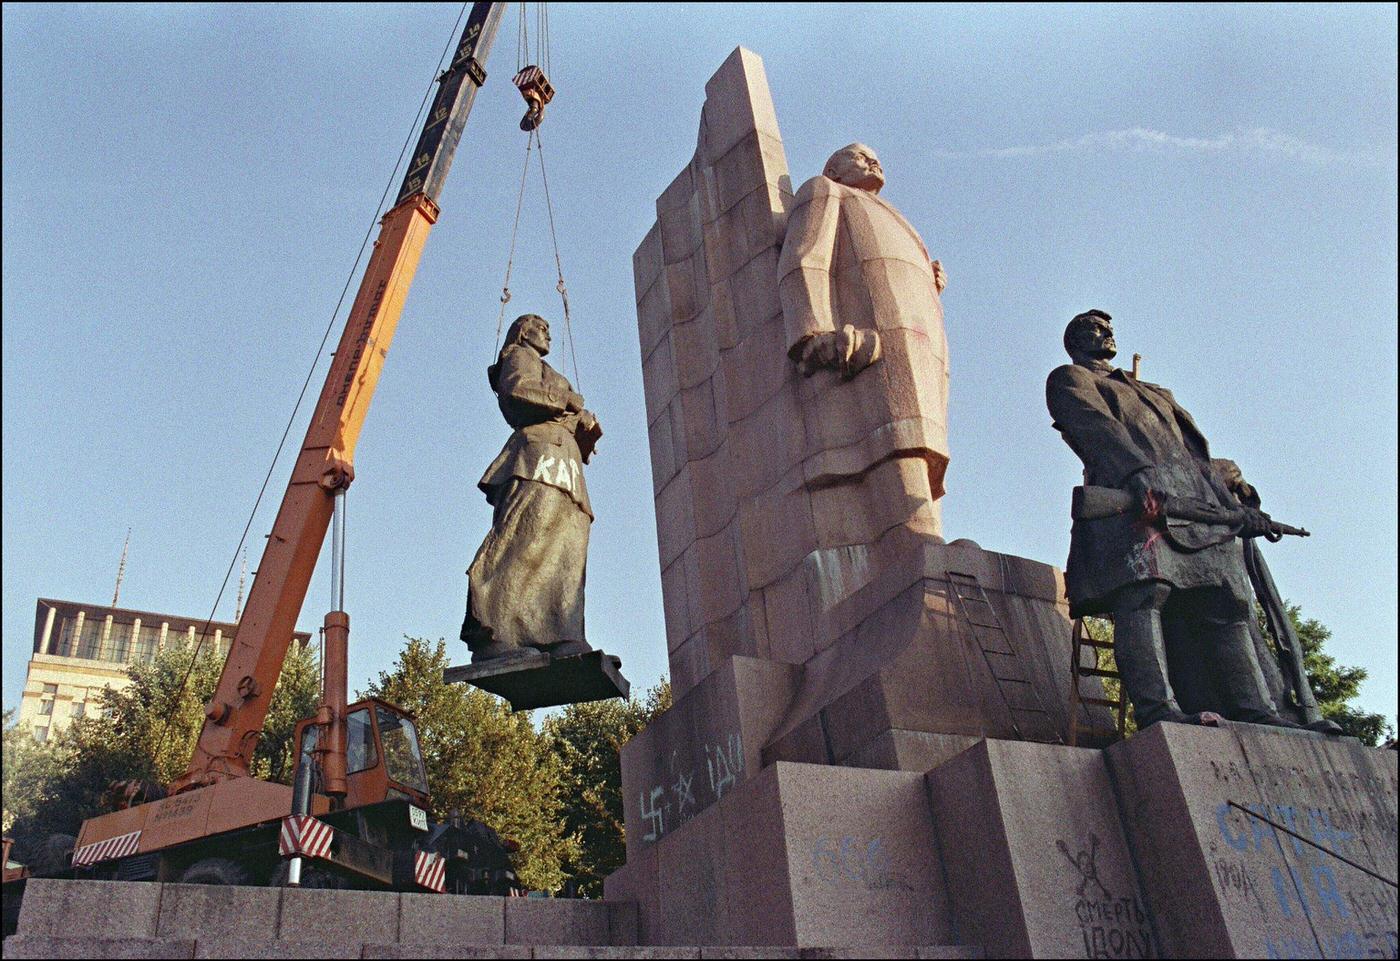 Statue Removed from Liberty Square, Formerly Lenin Square, in Central Kiev, 1991